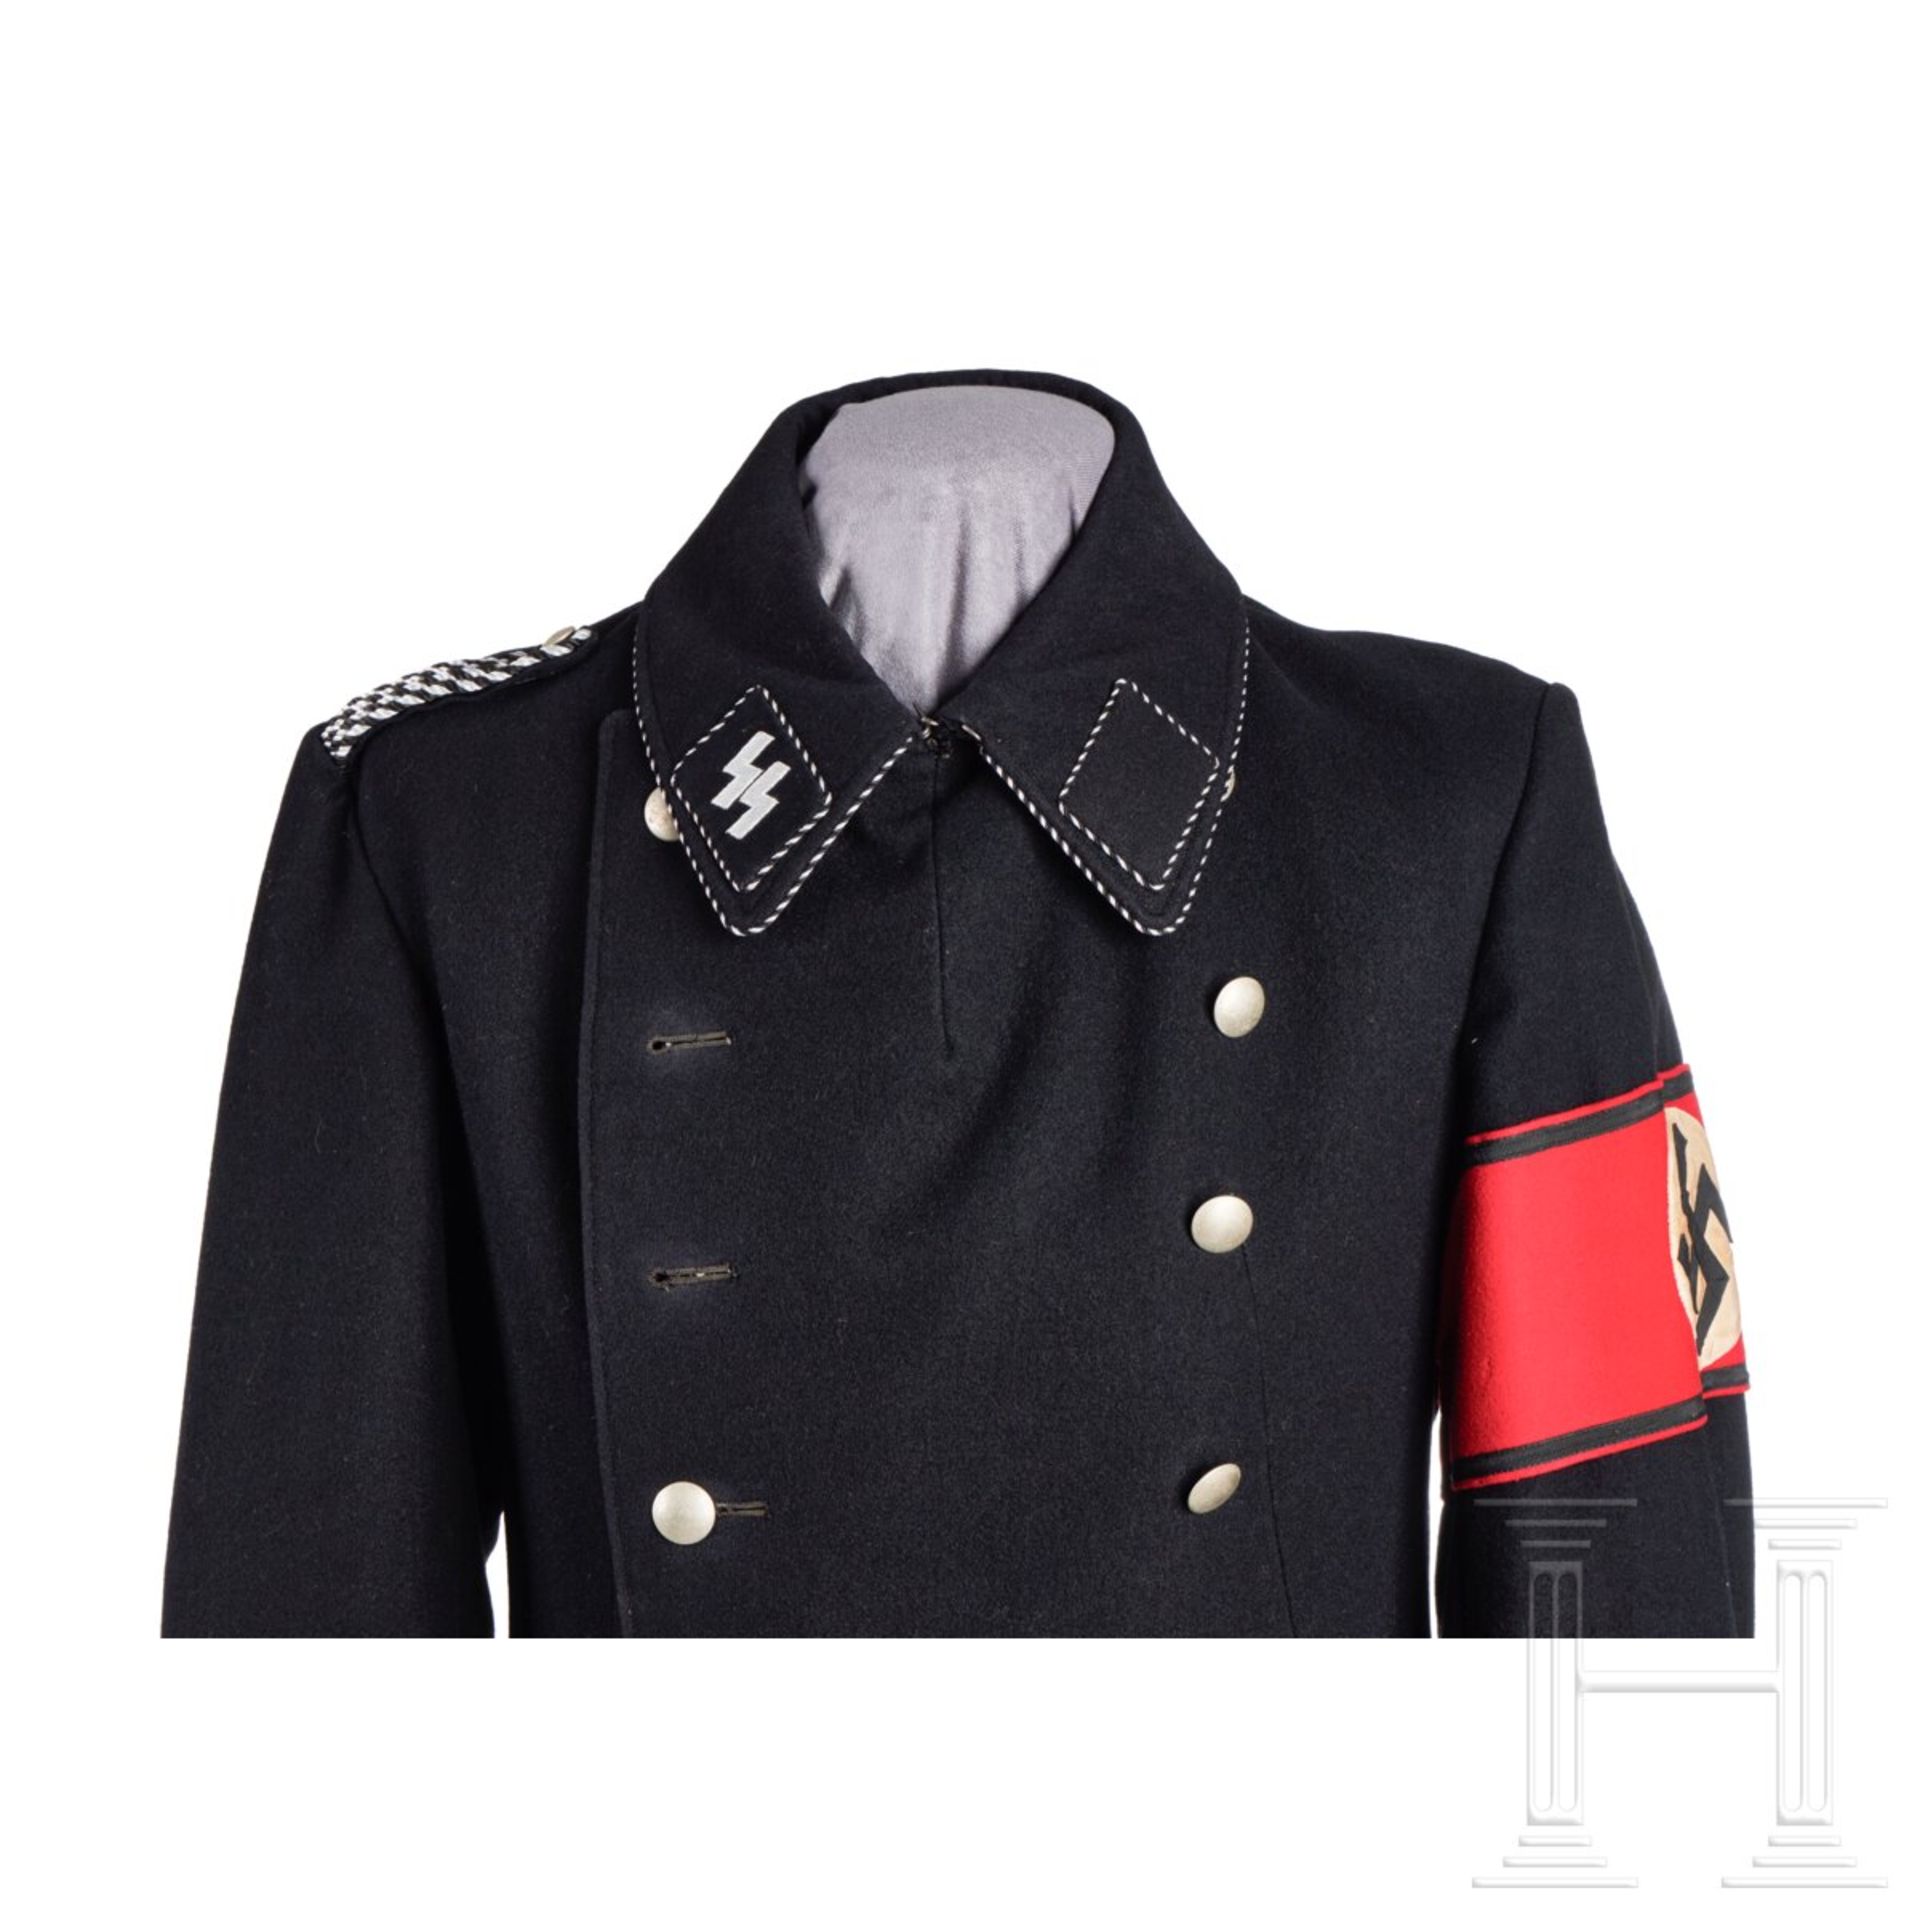 An Overcoat for a member of the Personal Staff of the Reichsführer-SS - Bild 3 aus 10